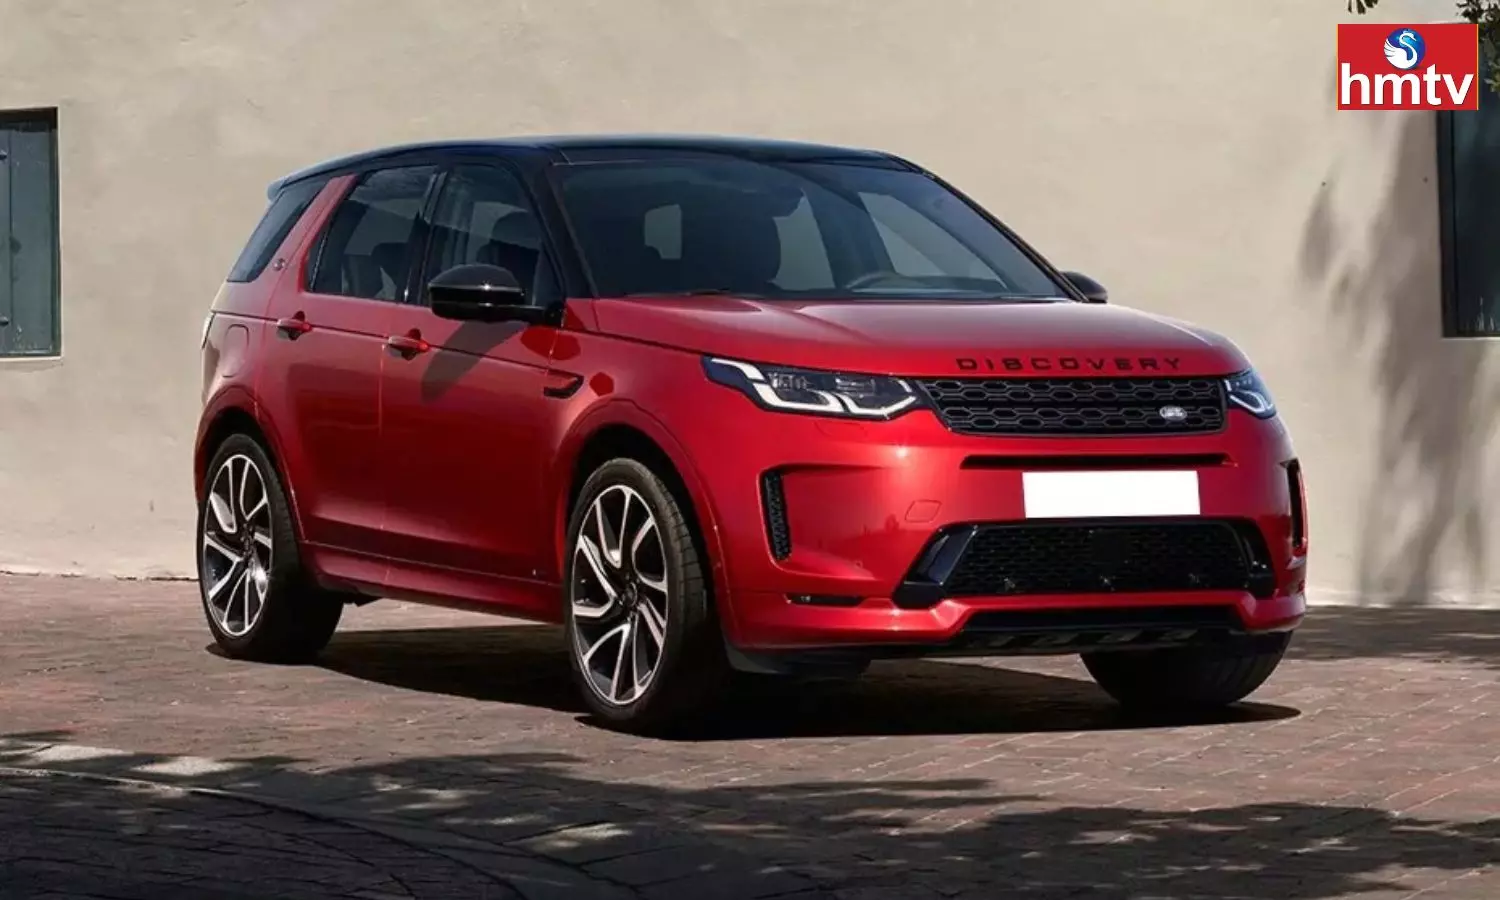 Range Rover Discovery Sport Launched At A Starting Price Of ₹67.90 Lakh